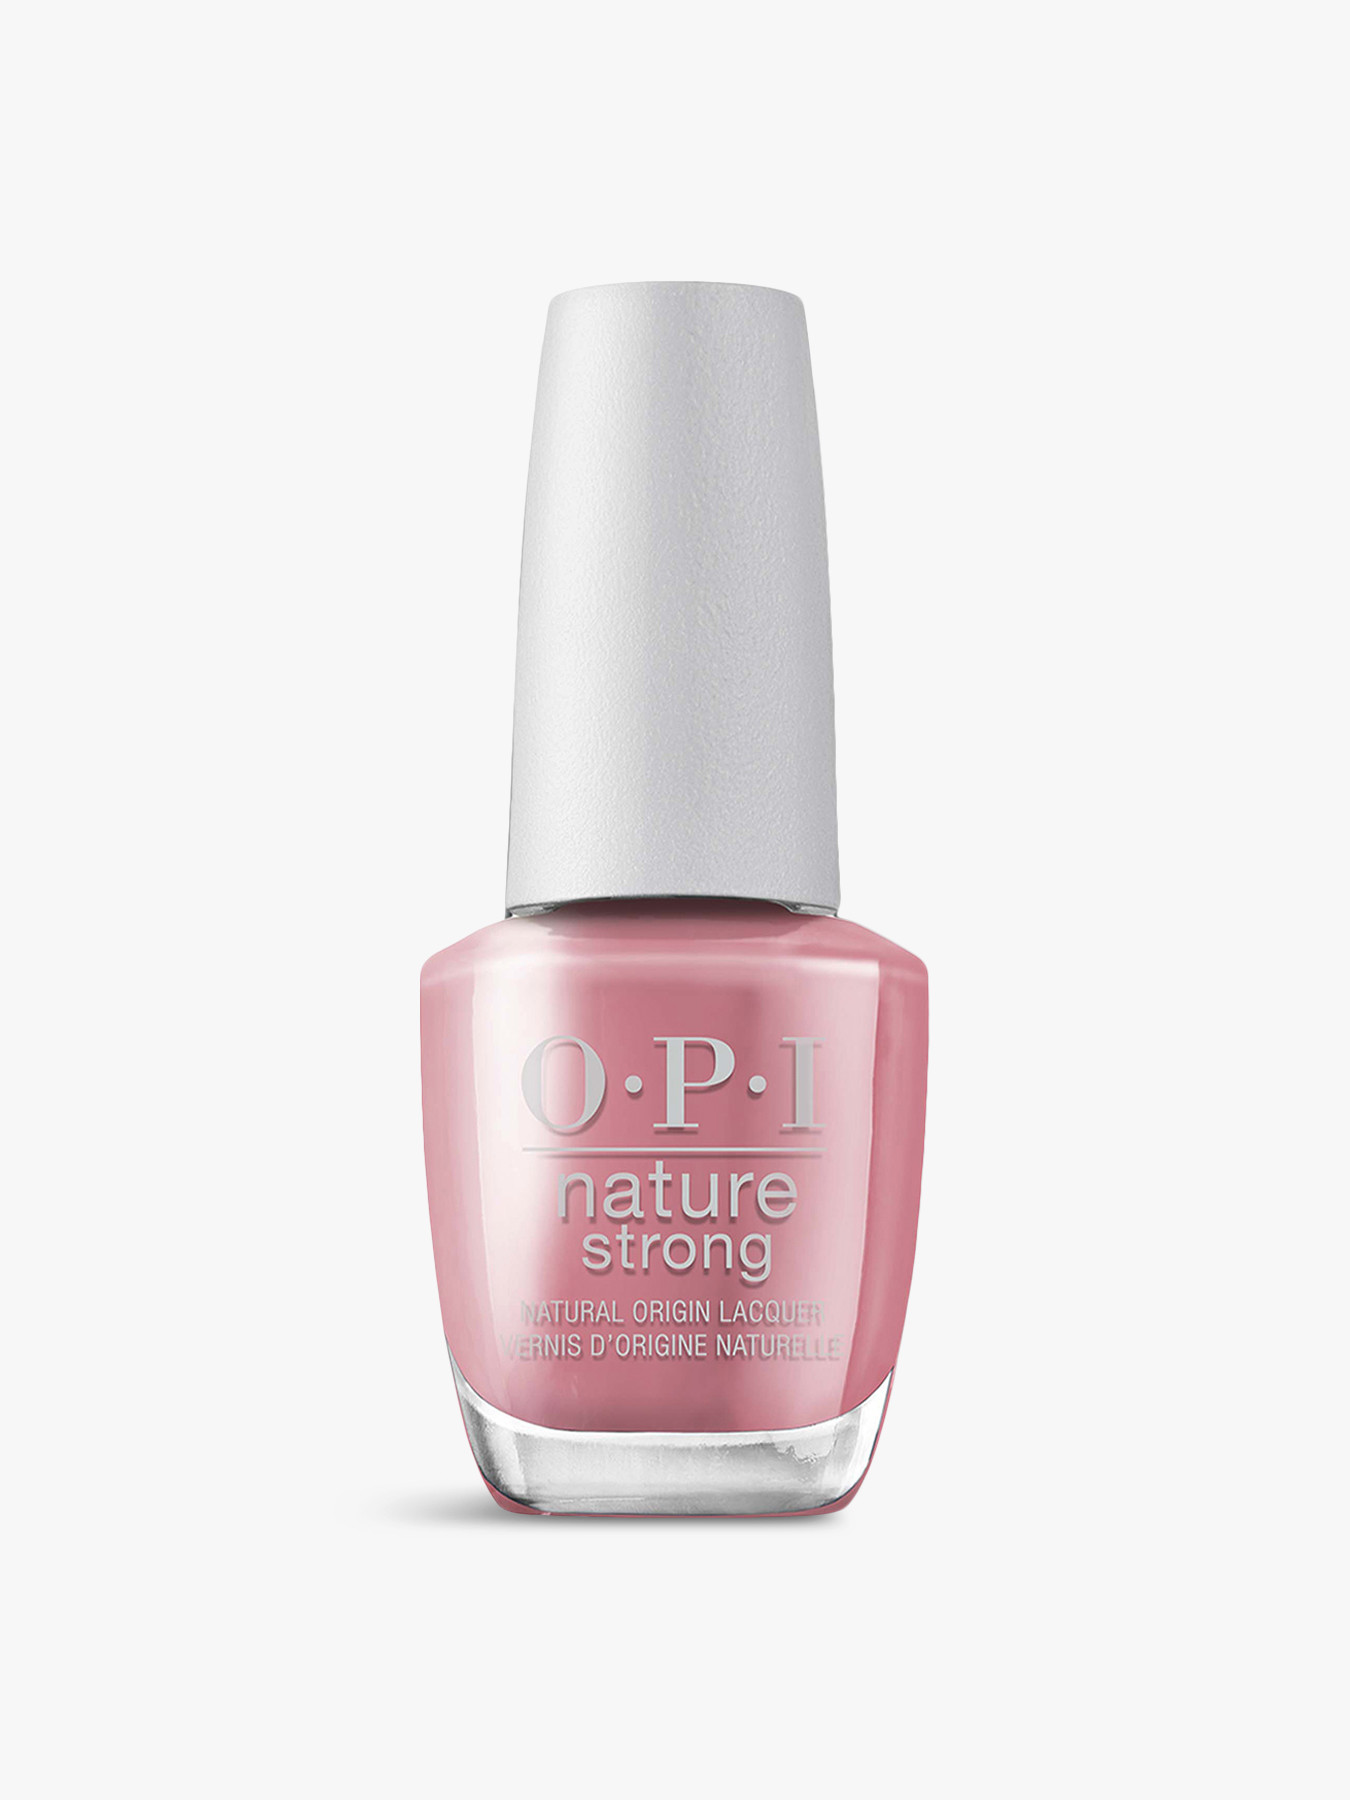 Opi Nature Strong Vegan Nail Polish For What Its Earth